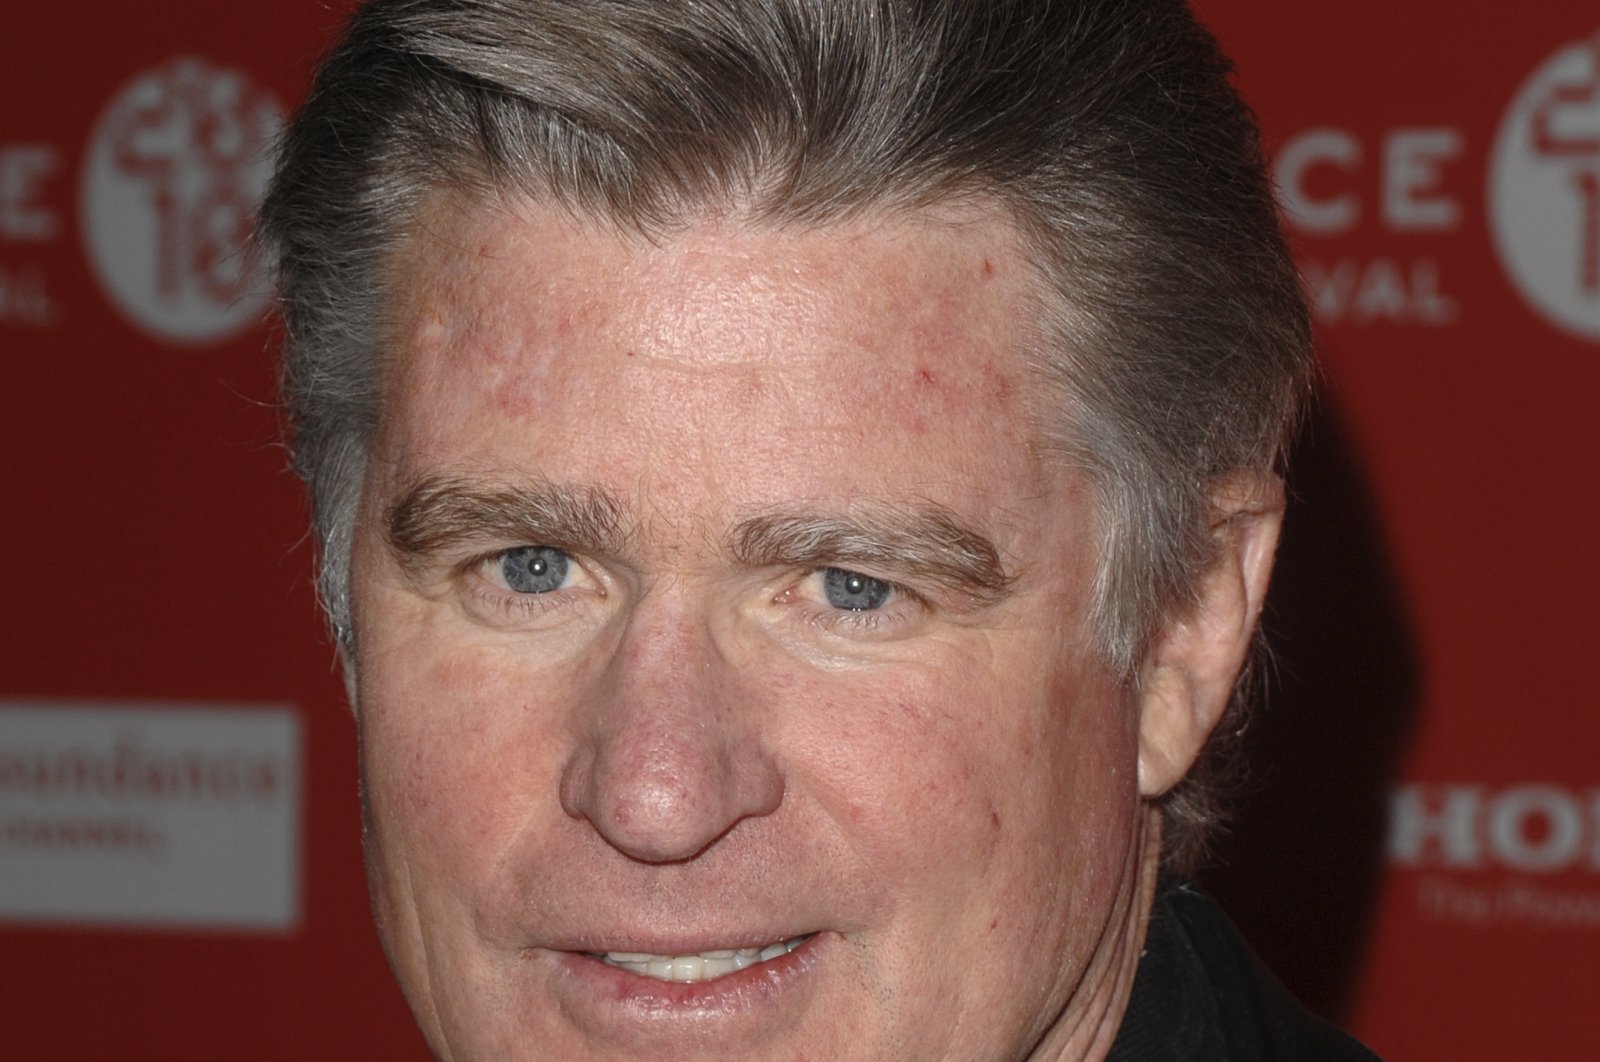 Actor Treat Williams attends the opening night premiere of &quot;Howl&quot; at the 2010 Sundance Film Festival in Park City, Utah, U.S., Jan. 21, 2010. (AP Photo)